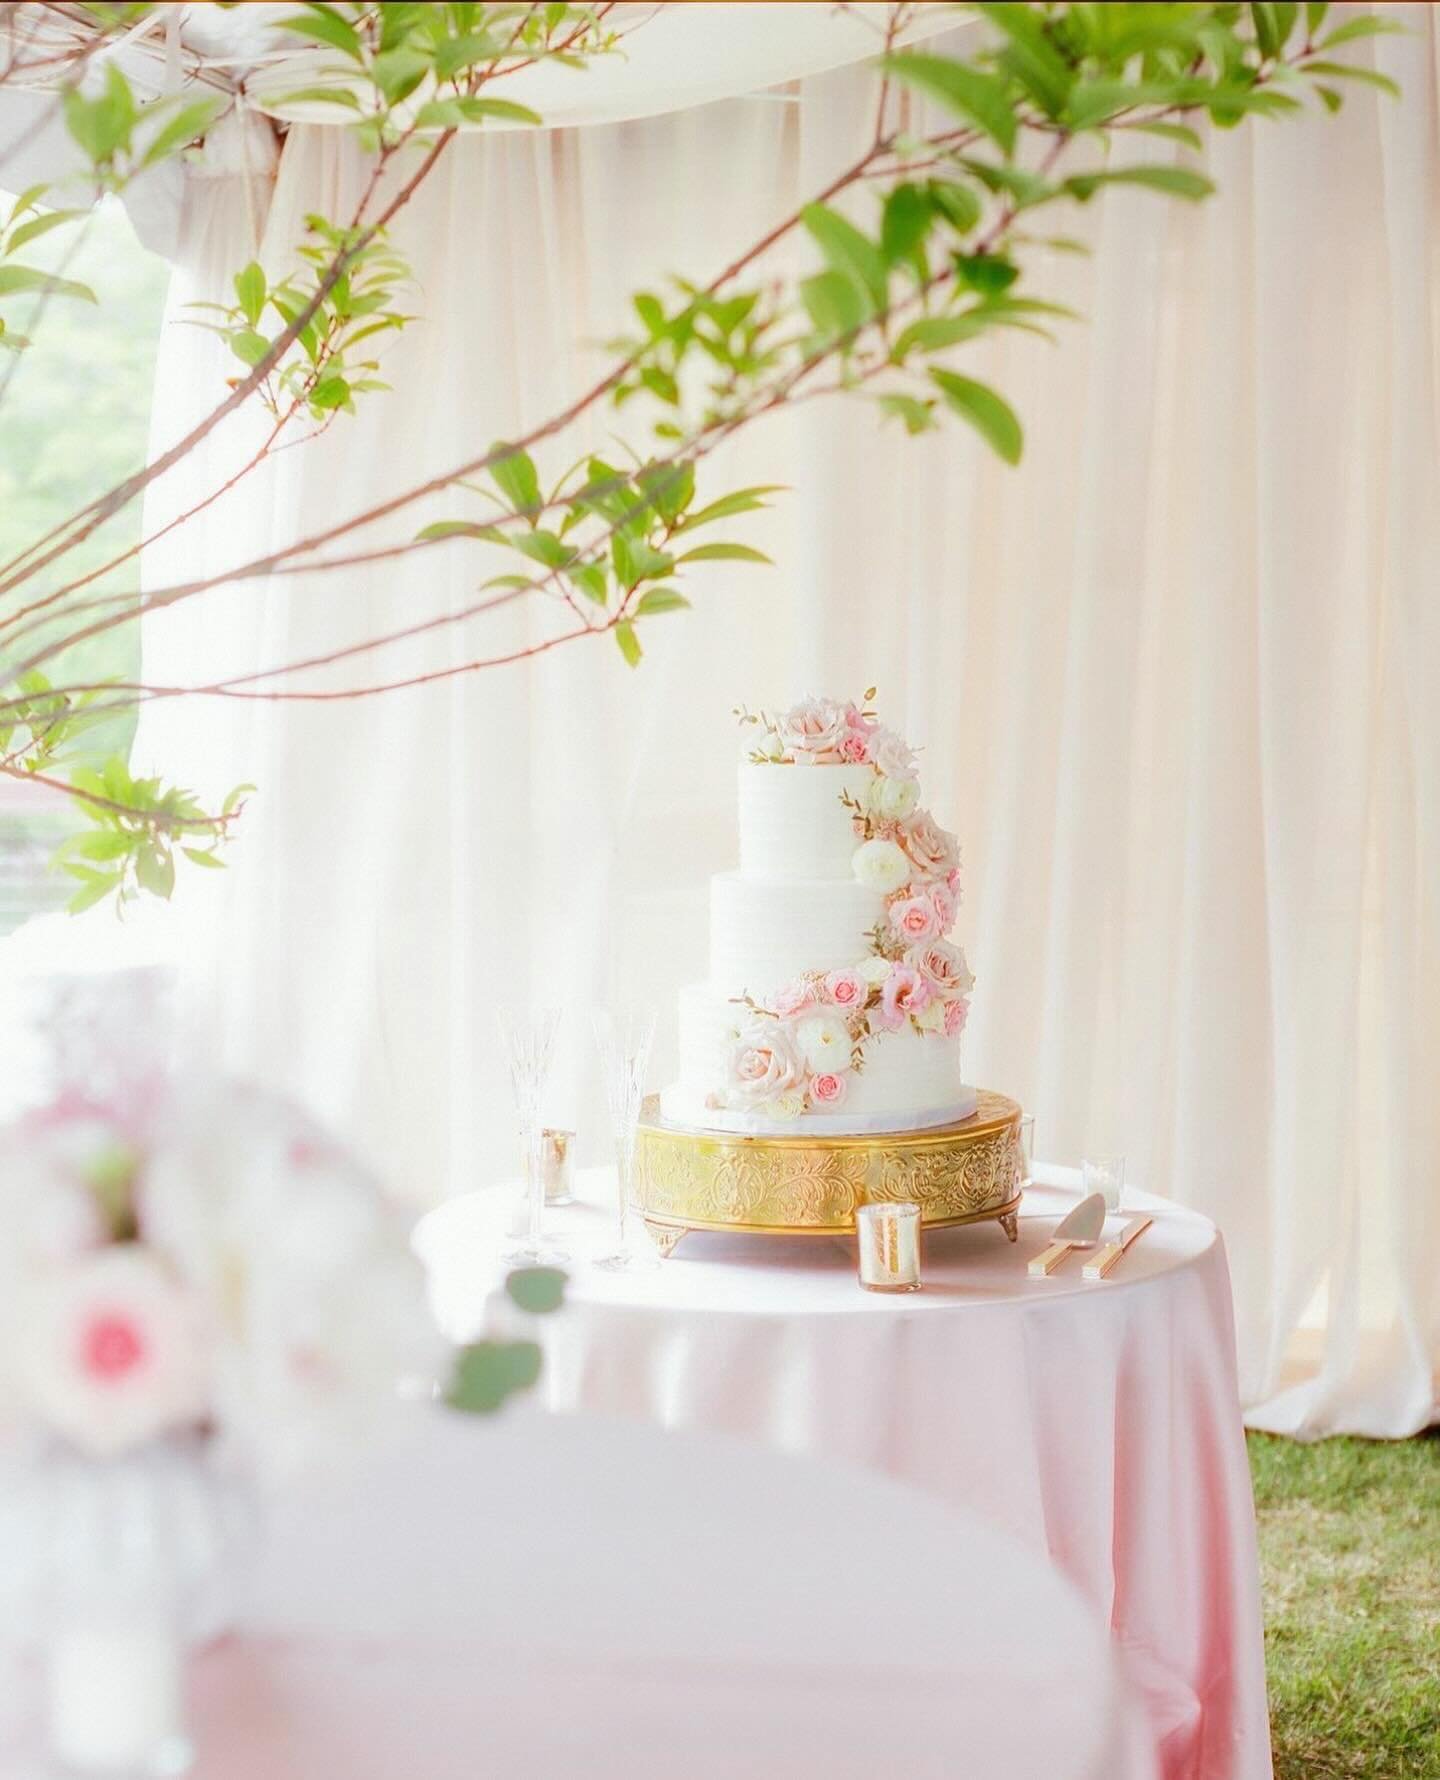 Cake backdrops are a sweet addition to any outdoor wedding. Just enough to highlight your big photo moments without blocking the view!